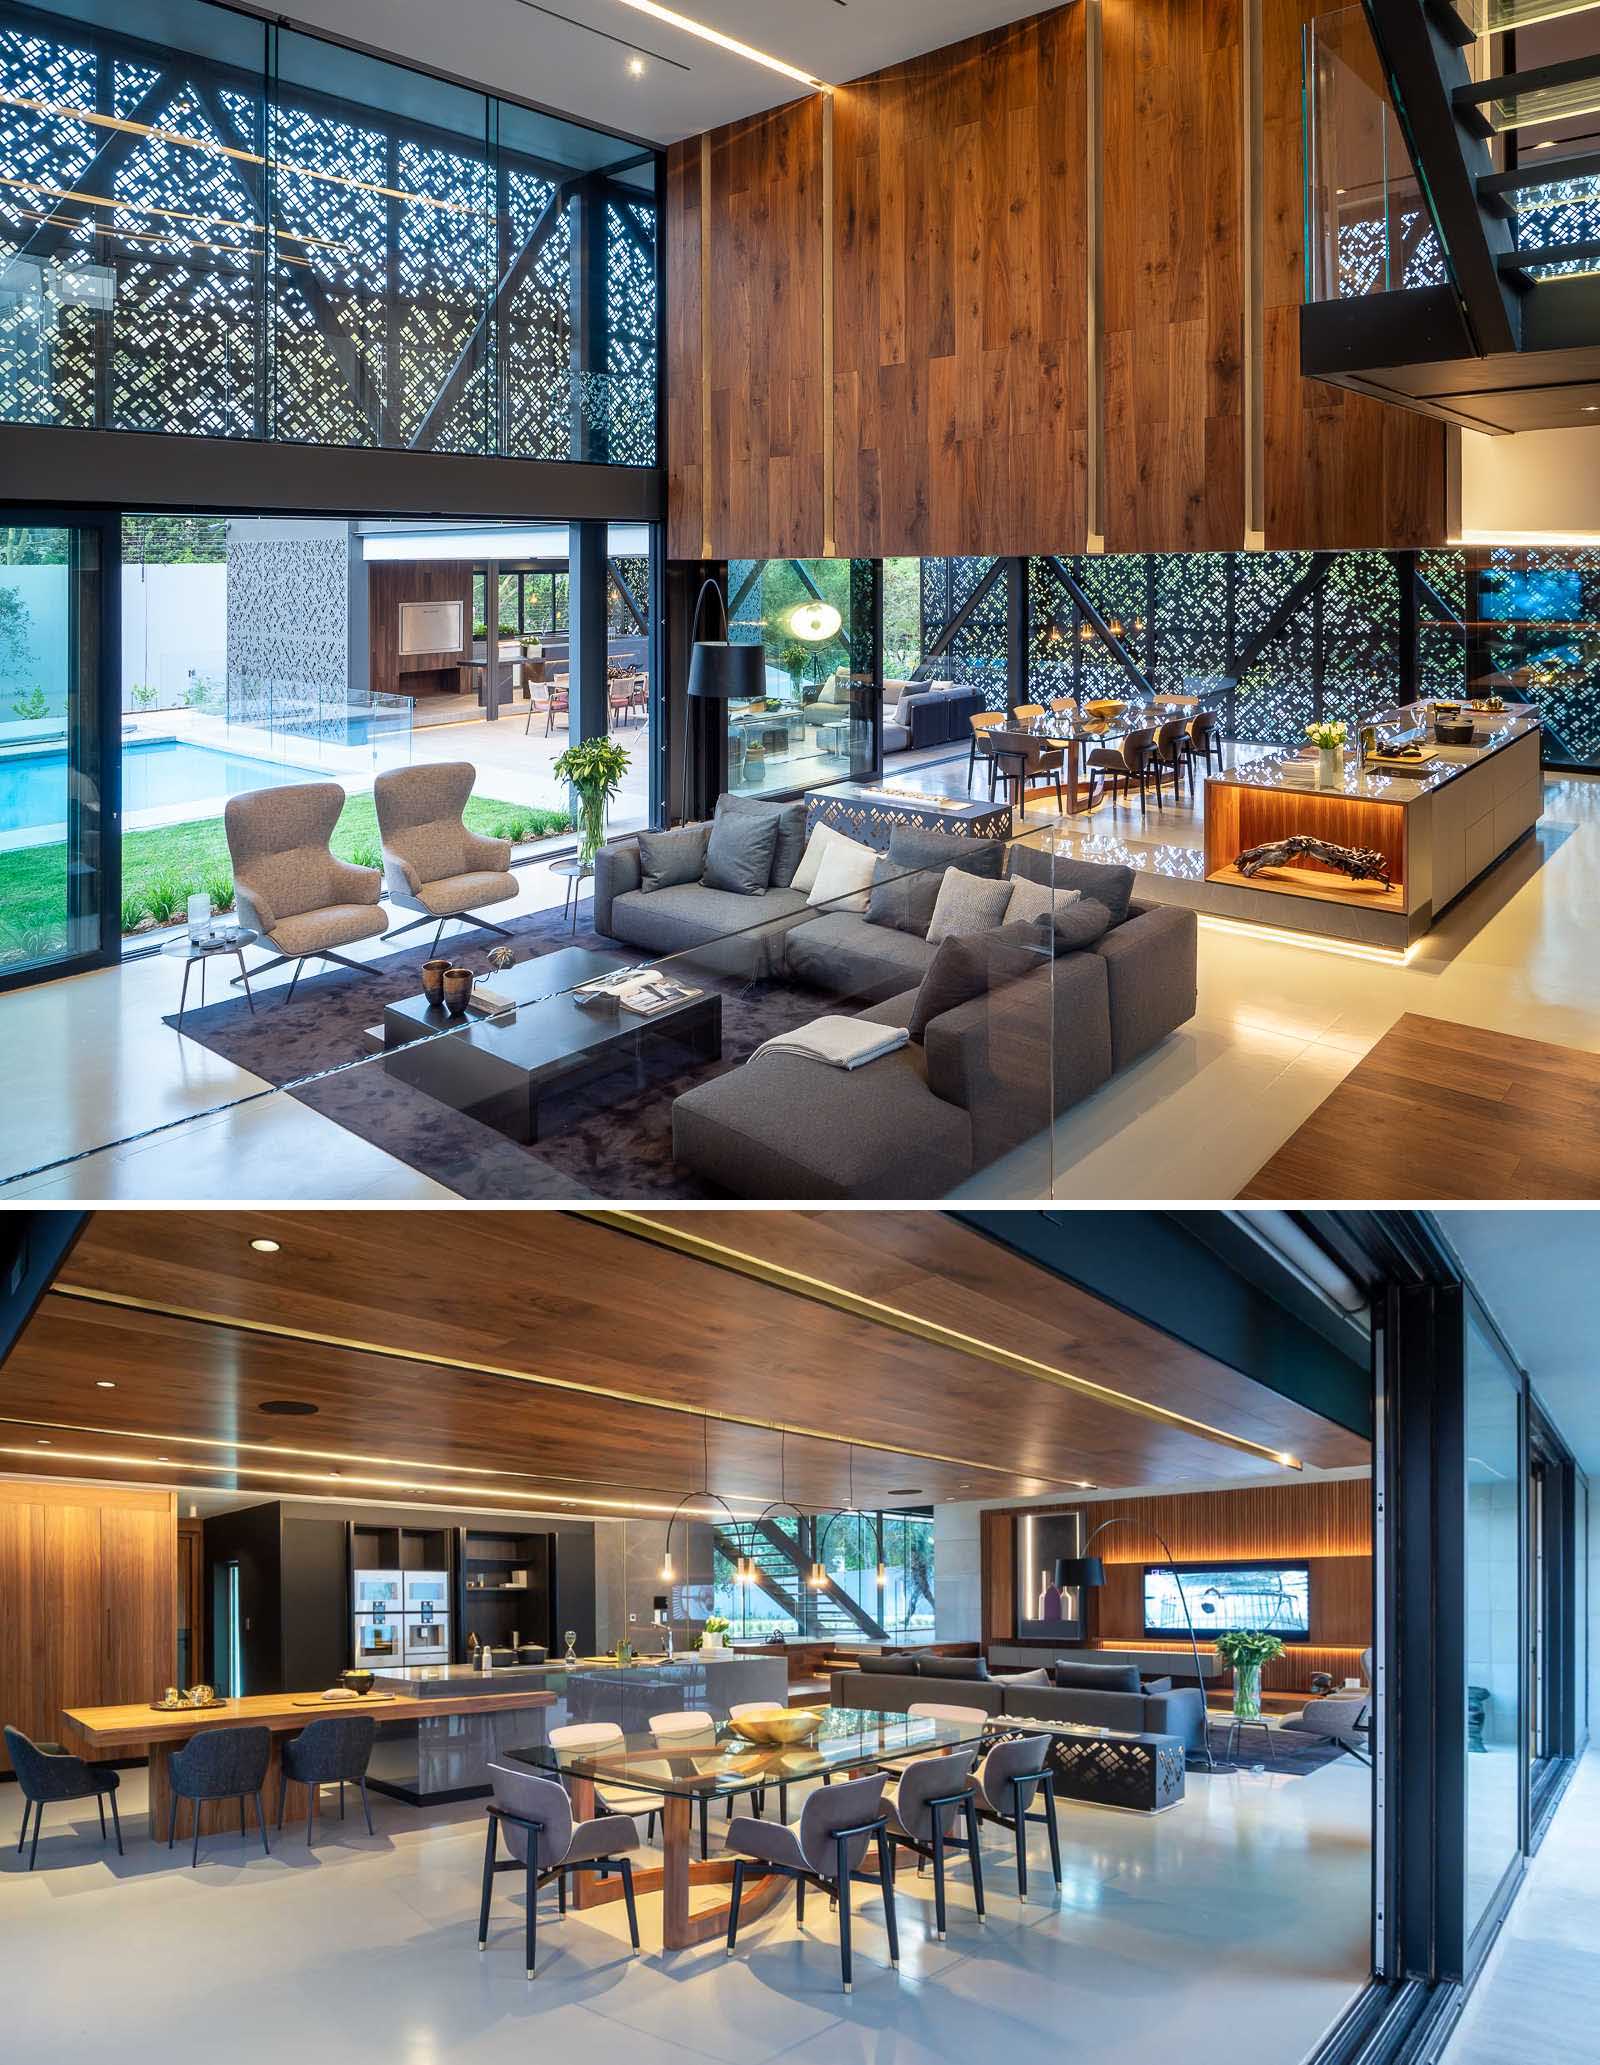 The interior of this modern home includes an open floor plan for the social areas, like the family room, dining area, and kitchen.